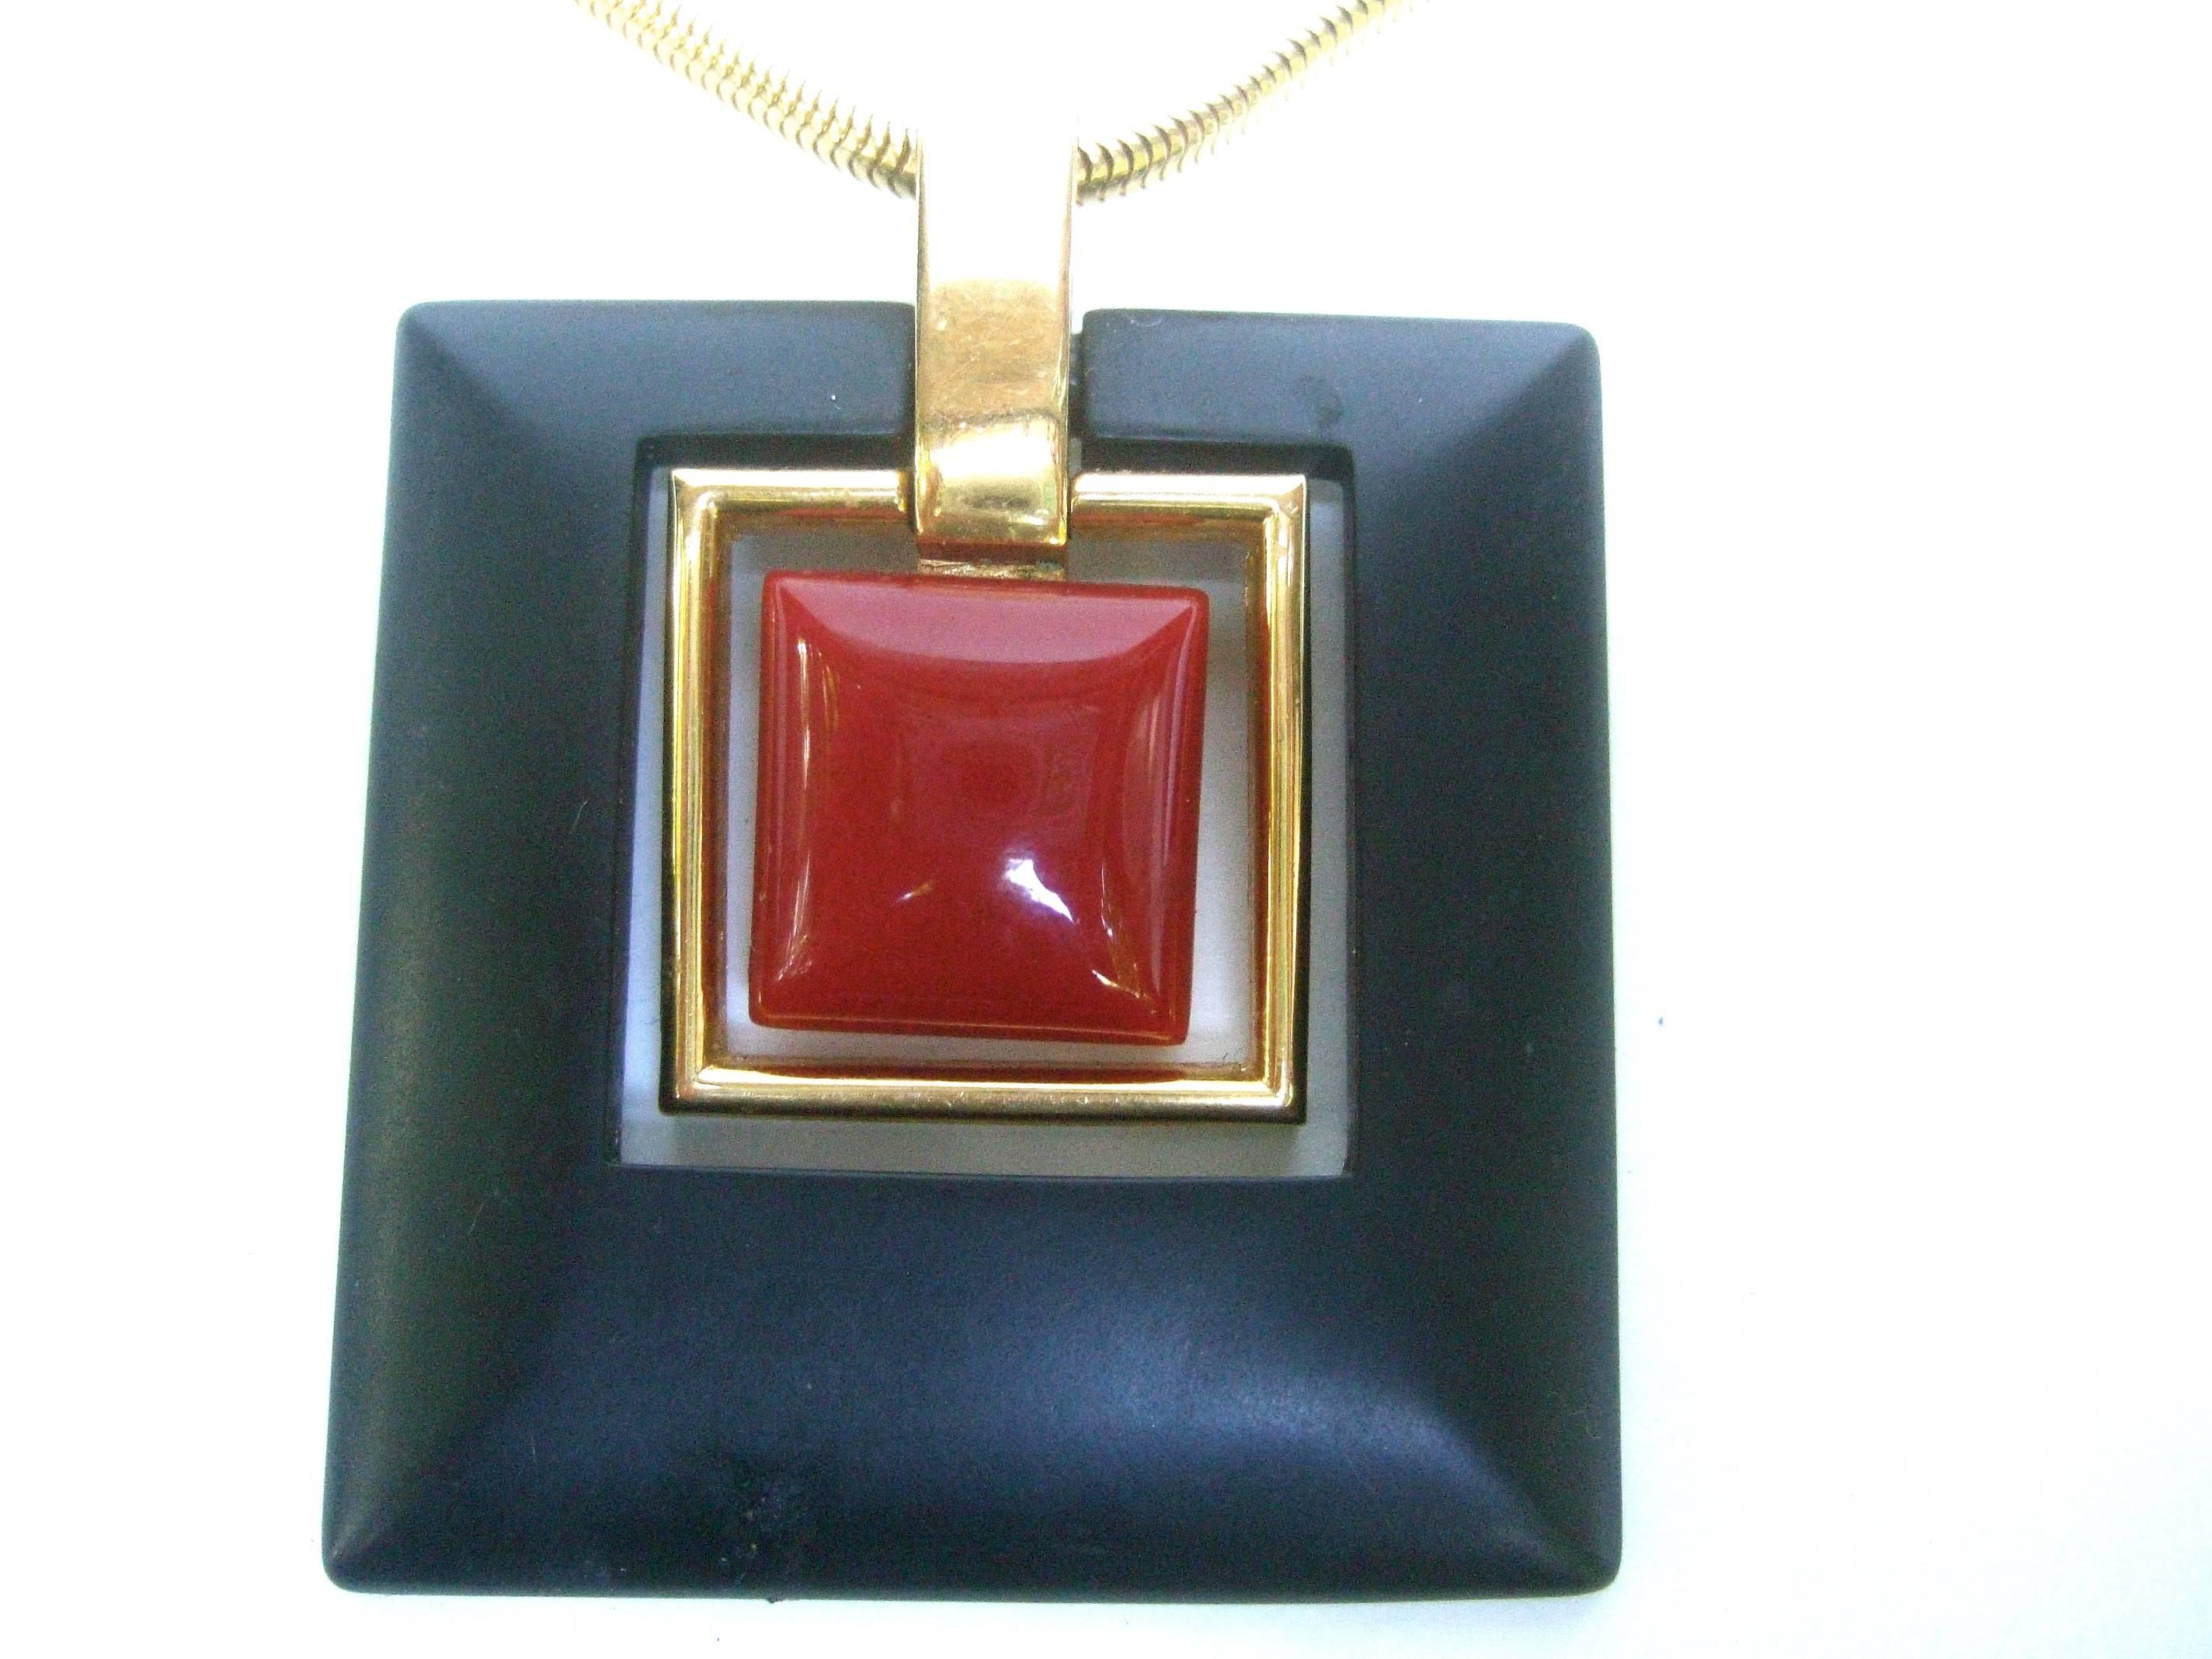 Trifari Mod Cinnabar & Ebony Resin Pendant Necklace c 1970 In Excellent Condition For Sale In University City, MO